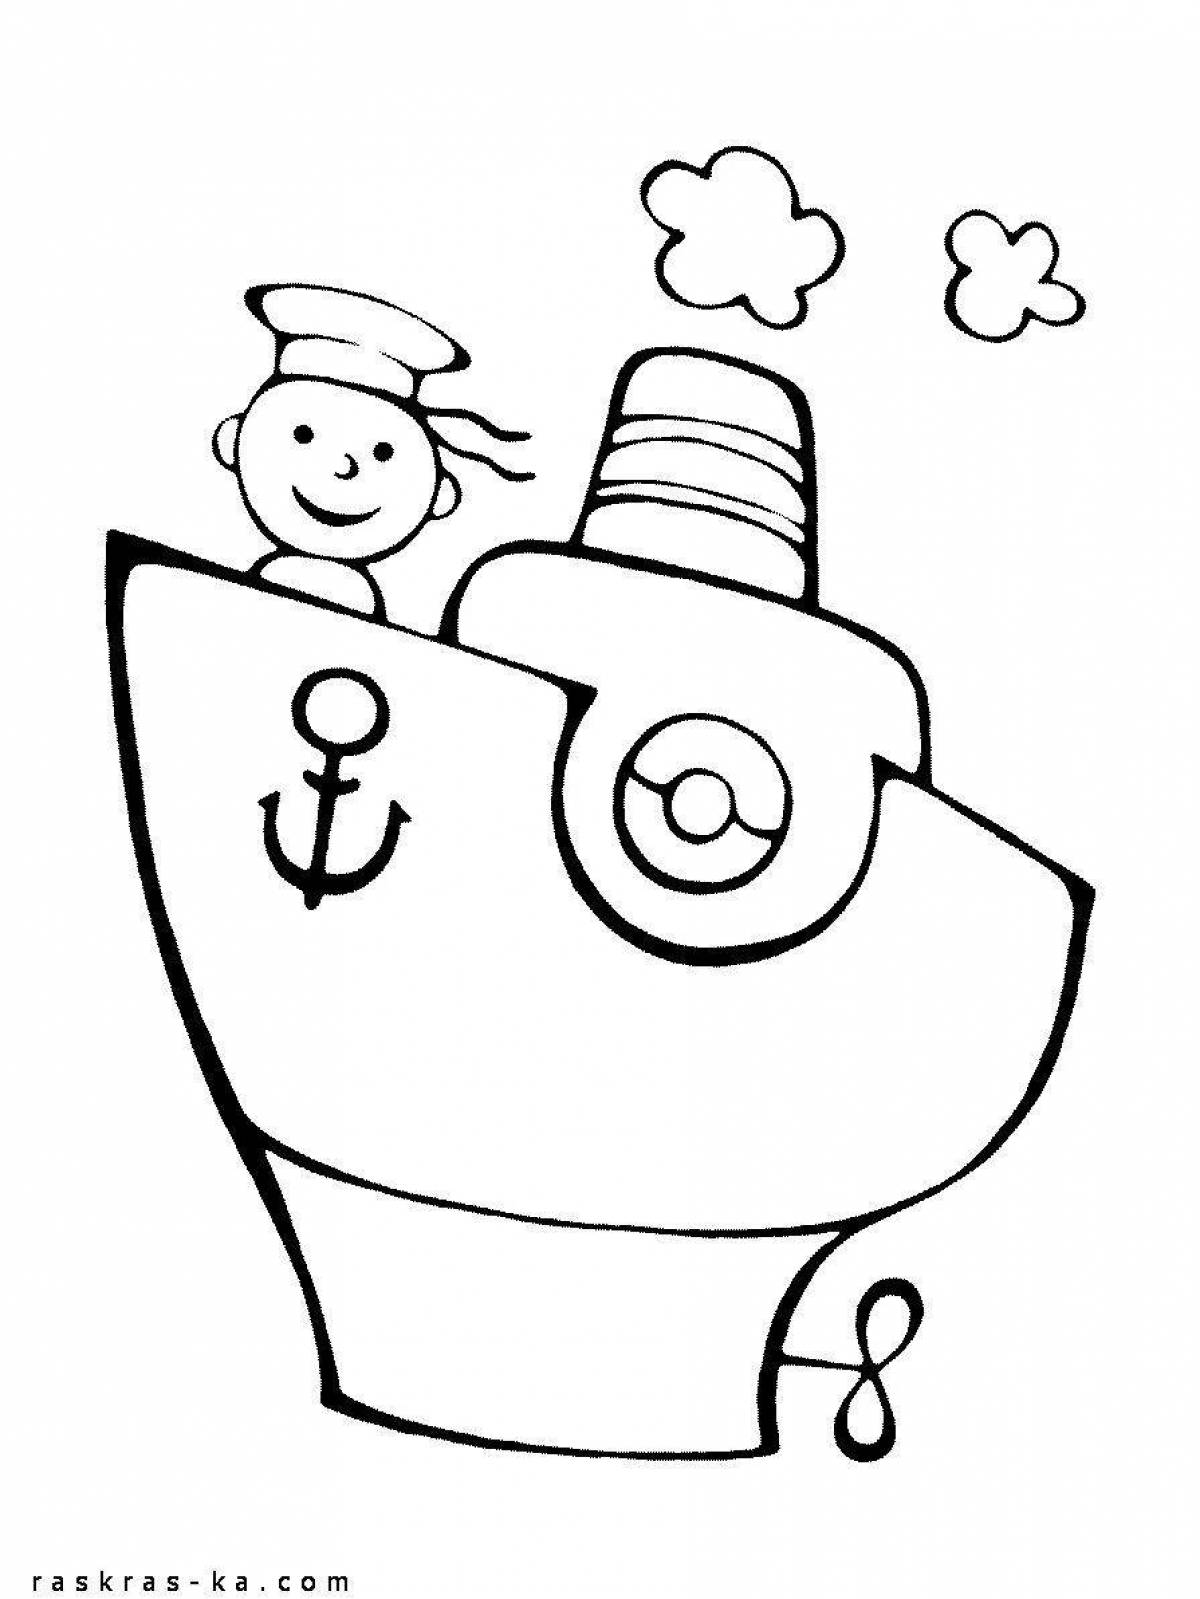 Coloring page happy ship February 23